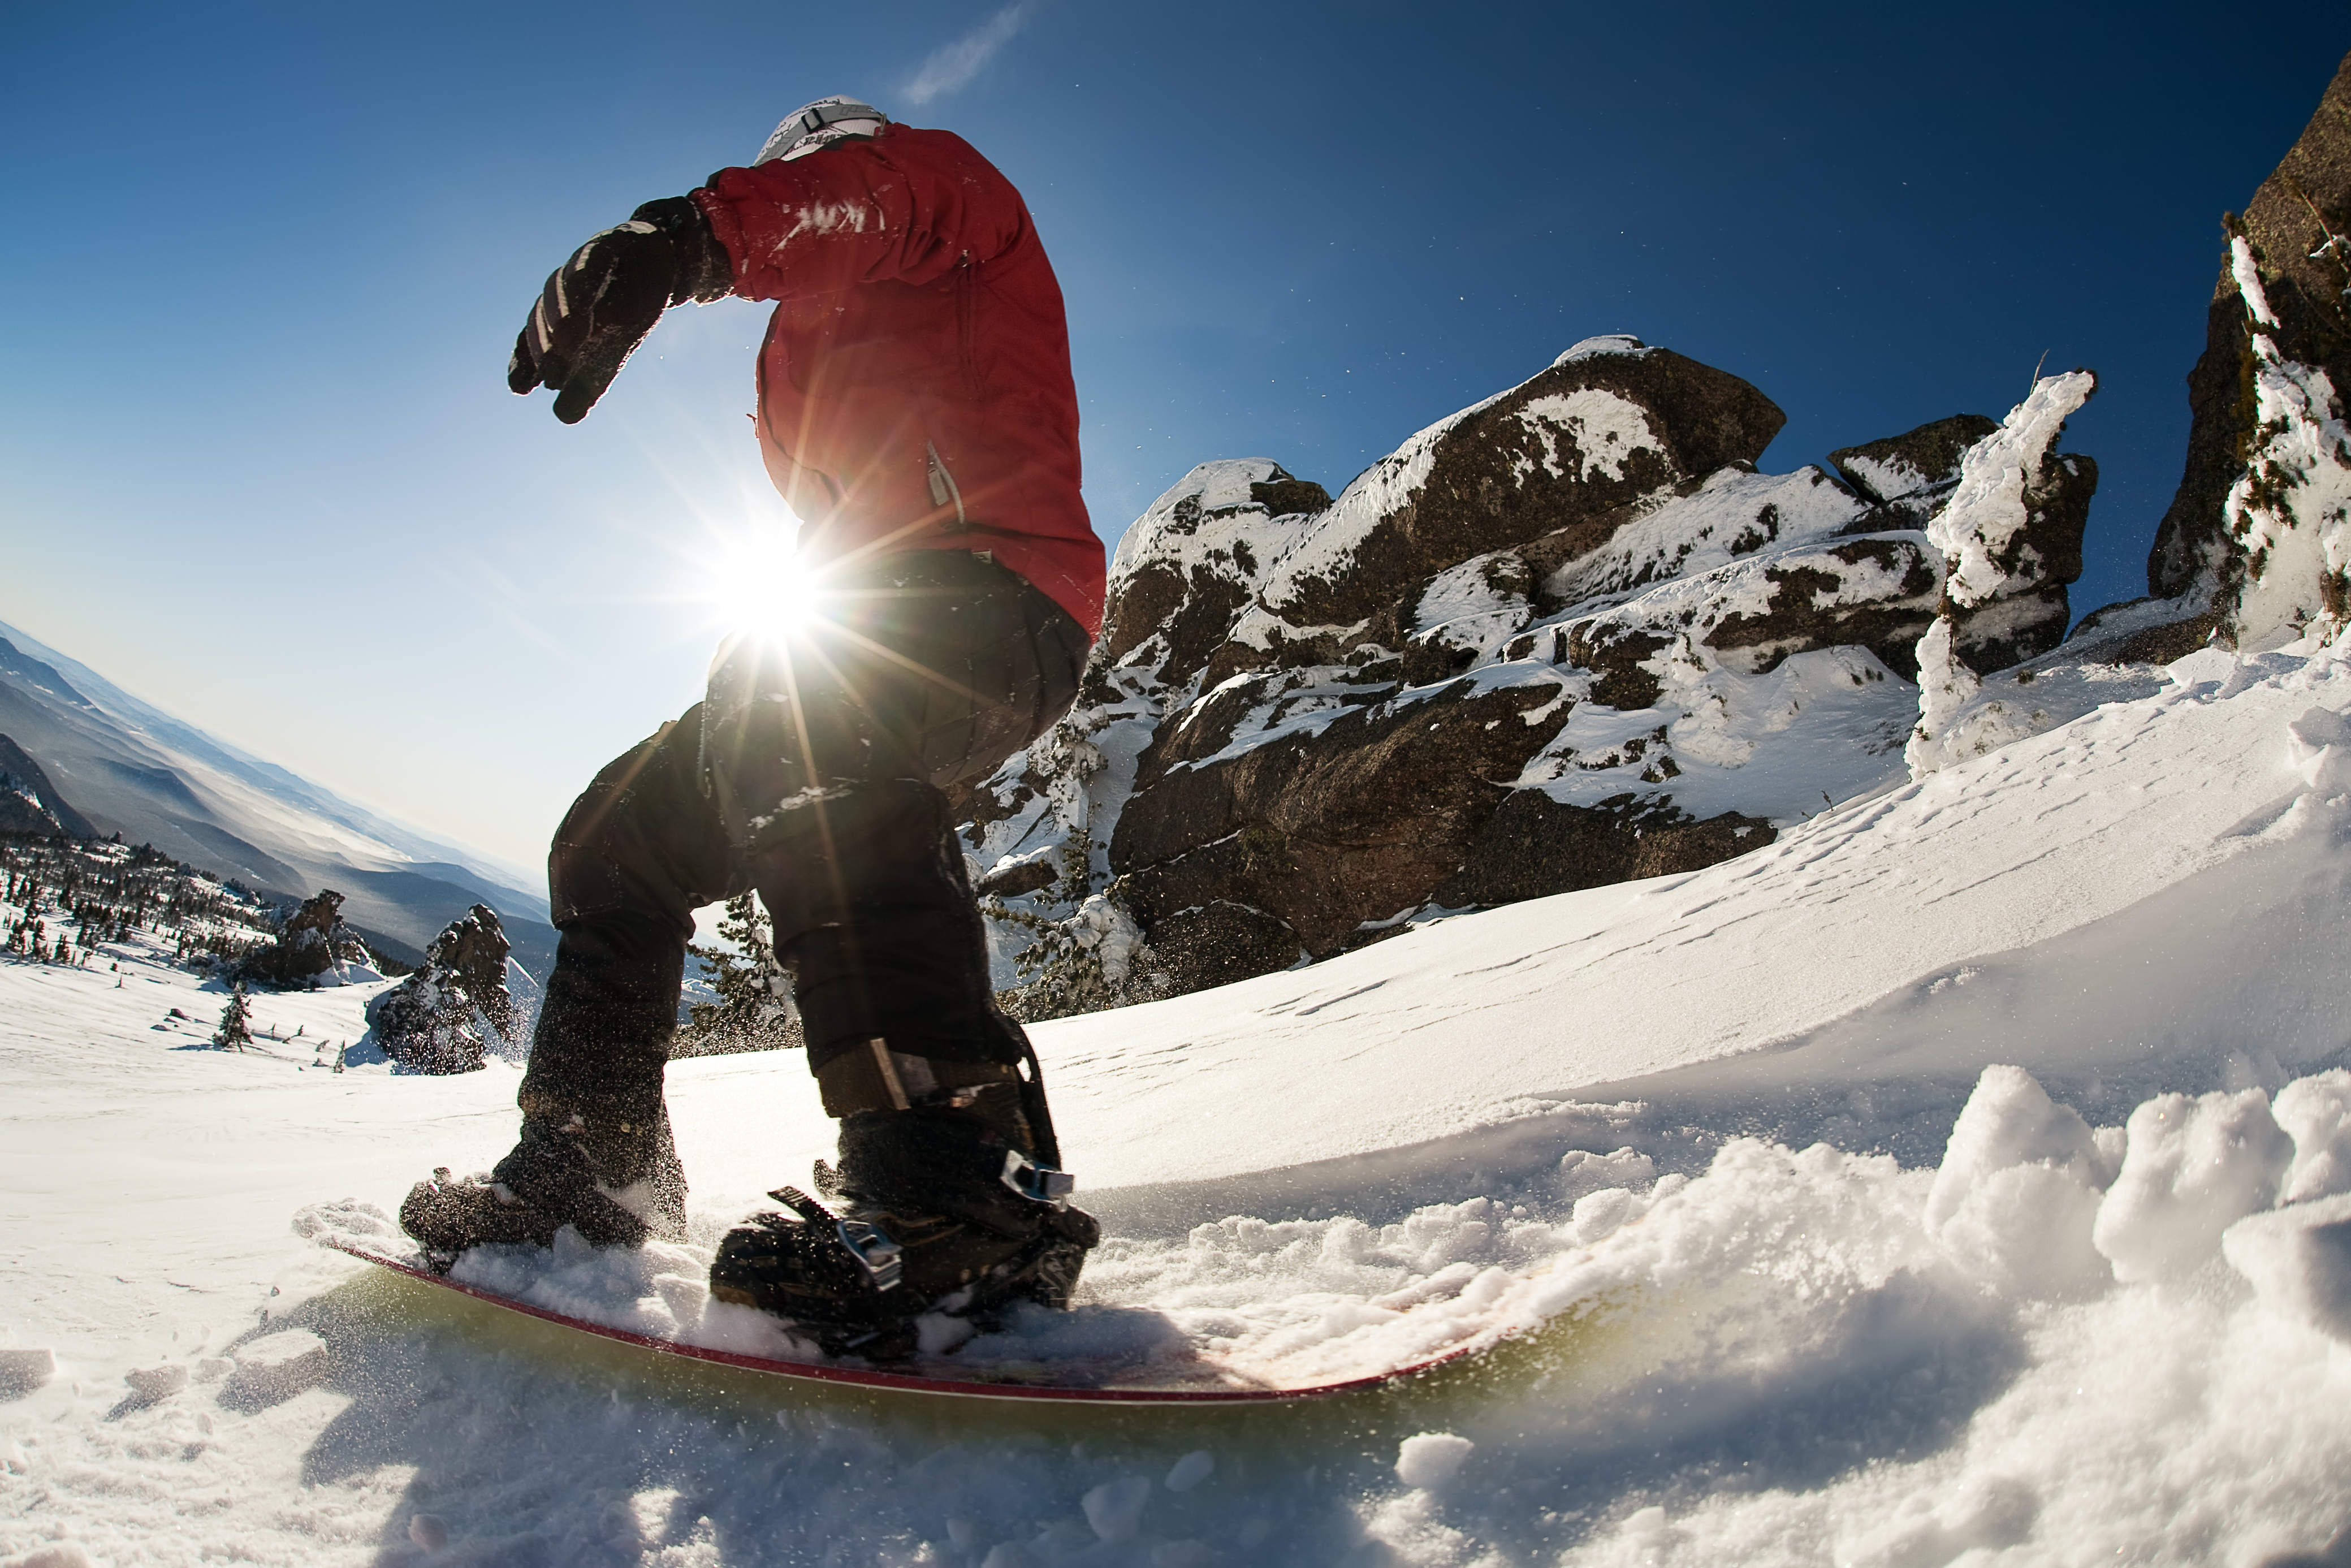 Top 3 Snowboarding Injuries and How to Prevent Them